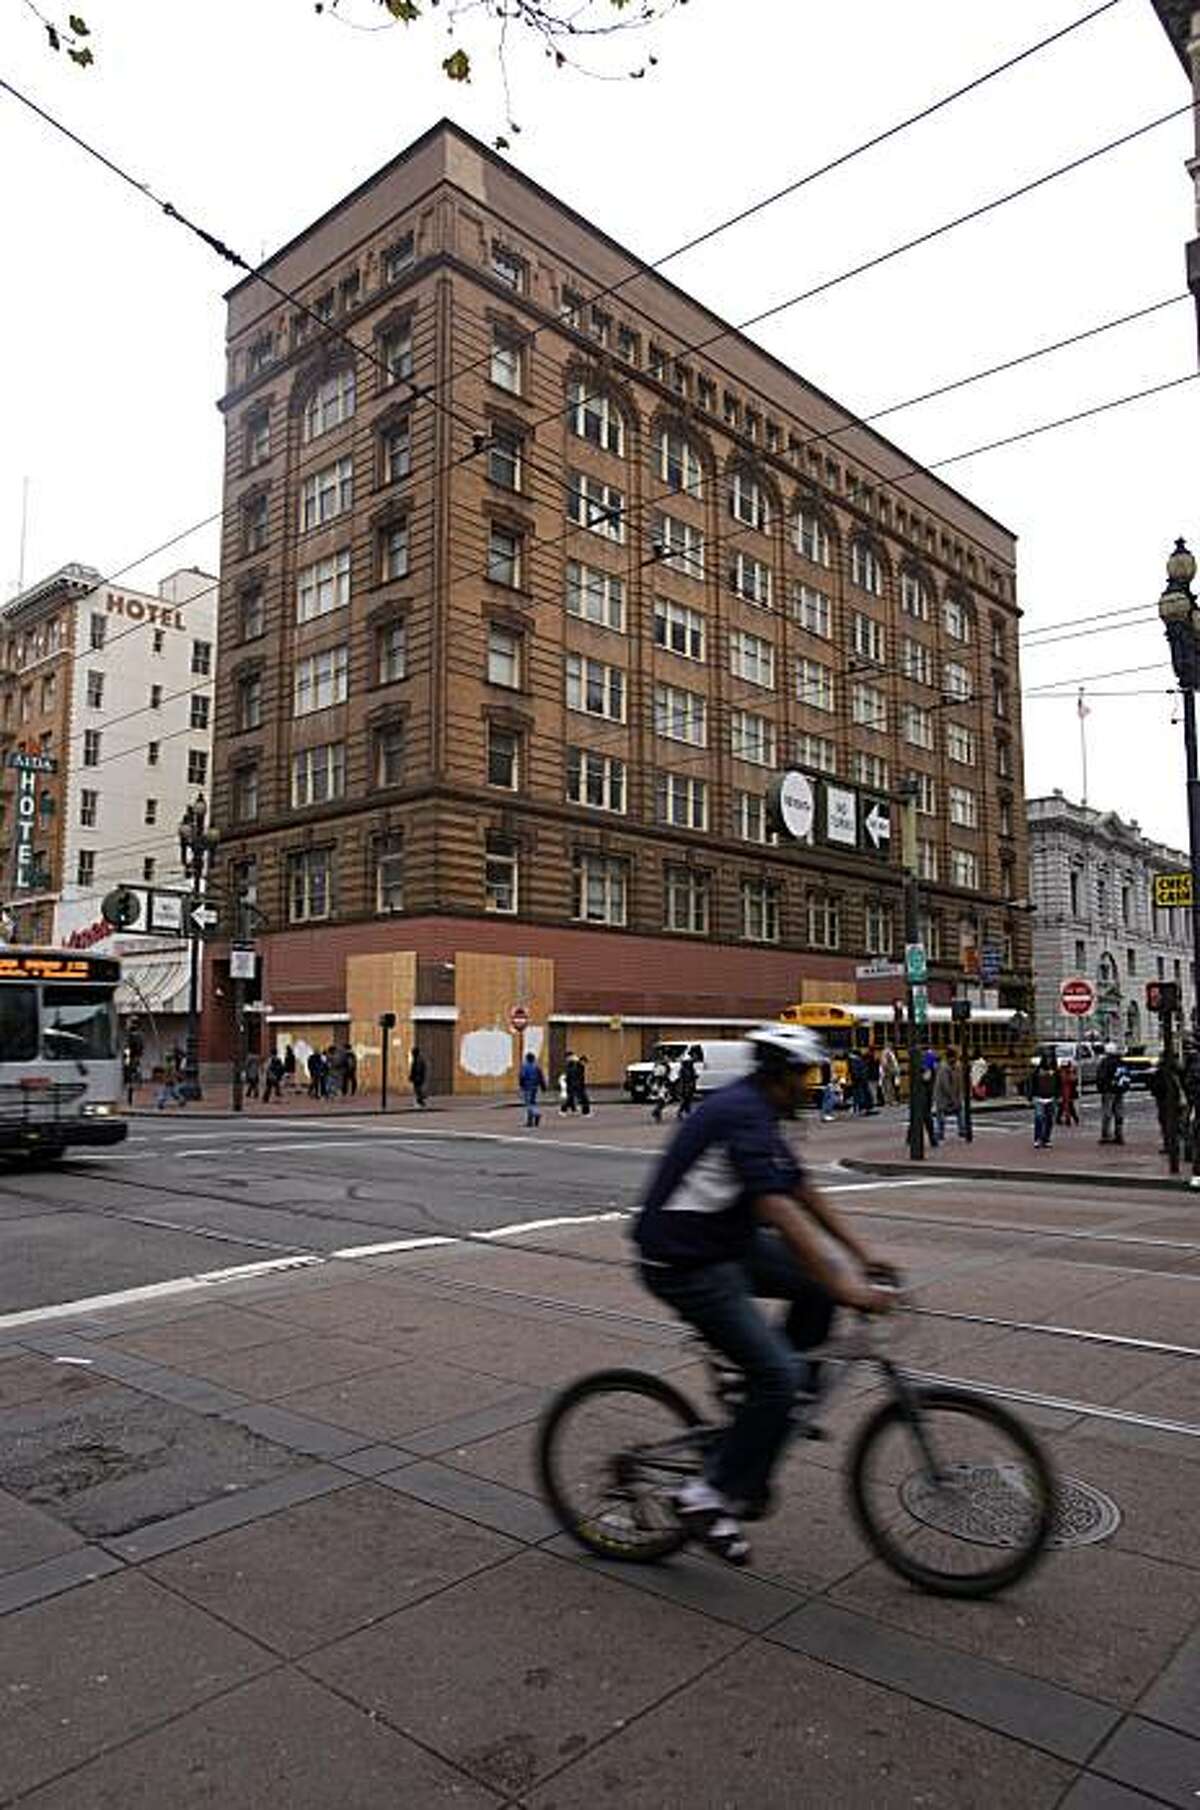 The Grant Building at 7th and Market Streets in San Francisco, Calif. is seen on Friday, Jan. 15, 2010. The building is the subject of a city anti-blight campaign. While historically it housed office tenants, the current developer wants to remake it into a youth hostel, restaurant and bar.